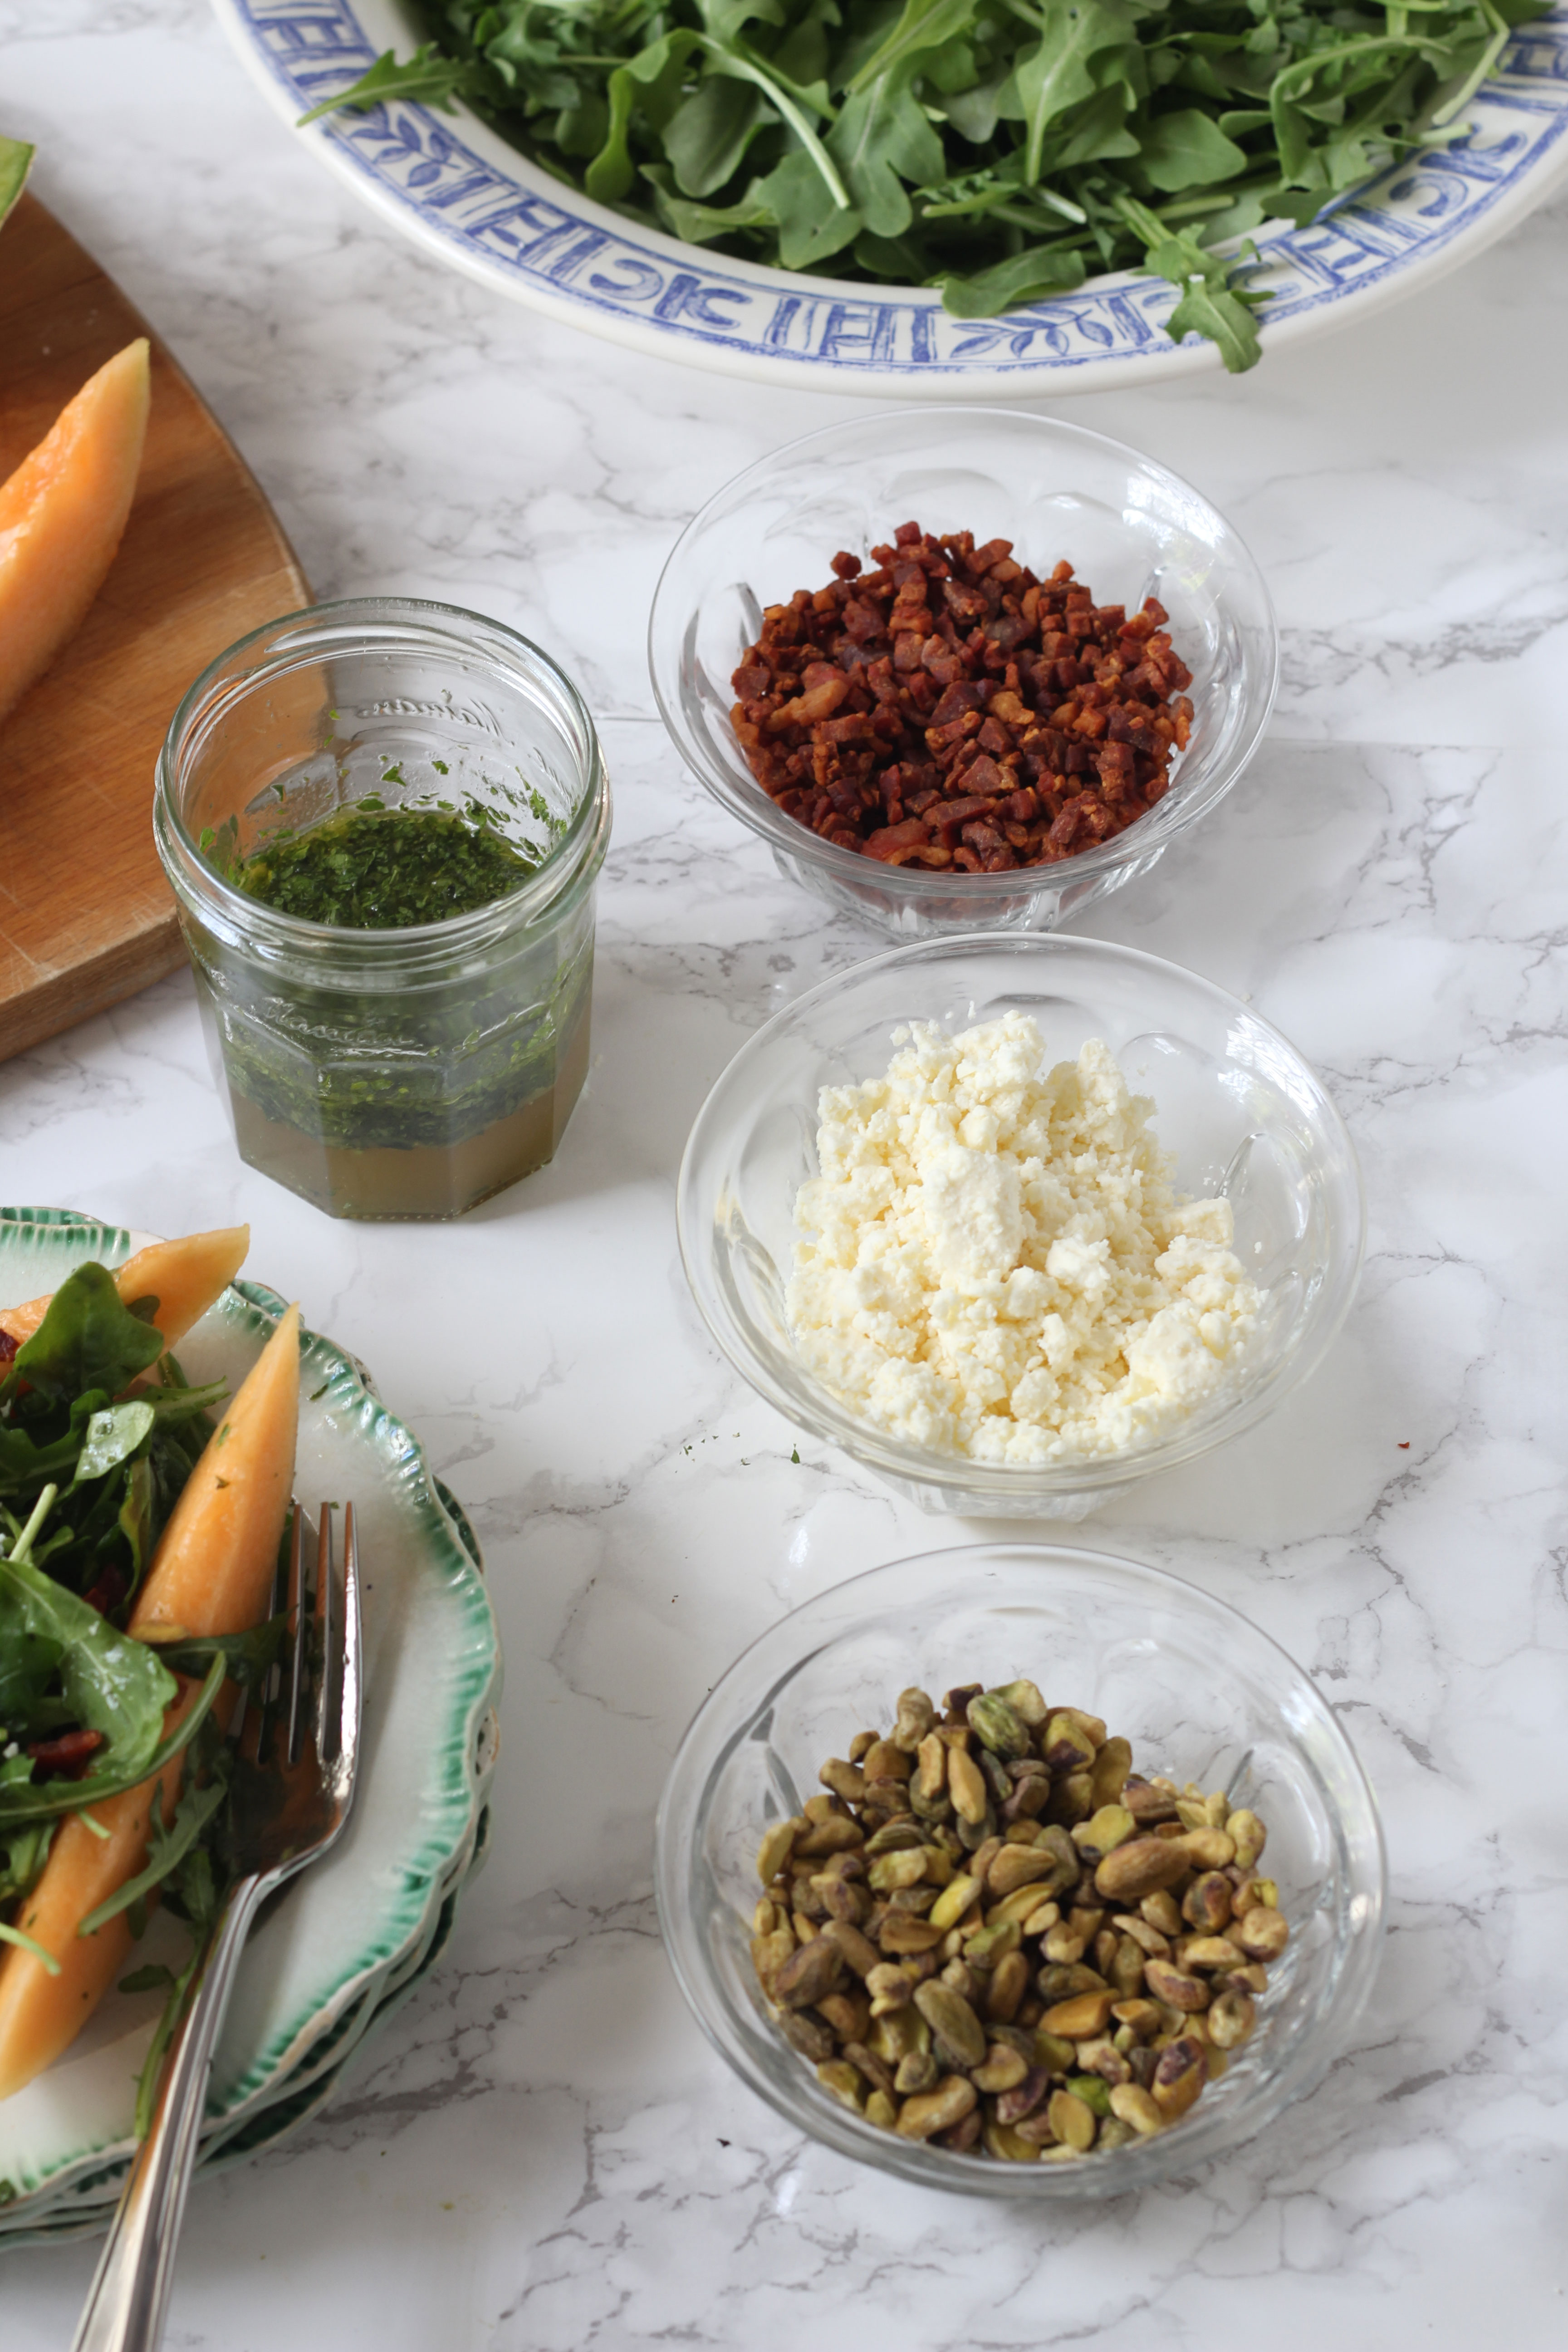 Everything you need to assemble a Melon and crispy prosciutto arugula salad. Including a fresh herb dressing, crumbled feta and chopped pistachios.